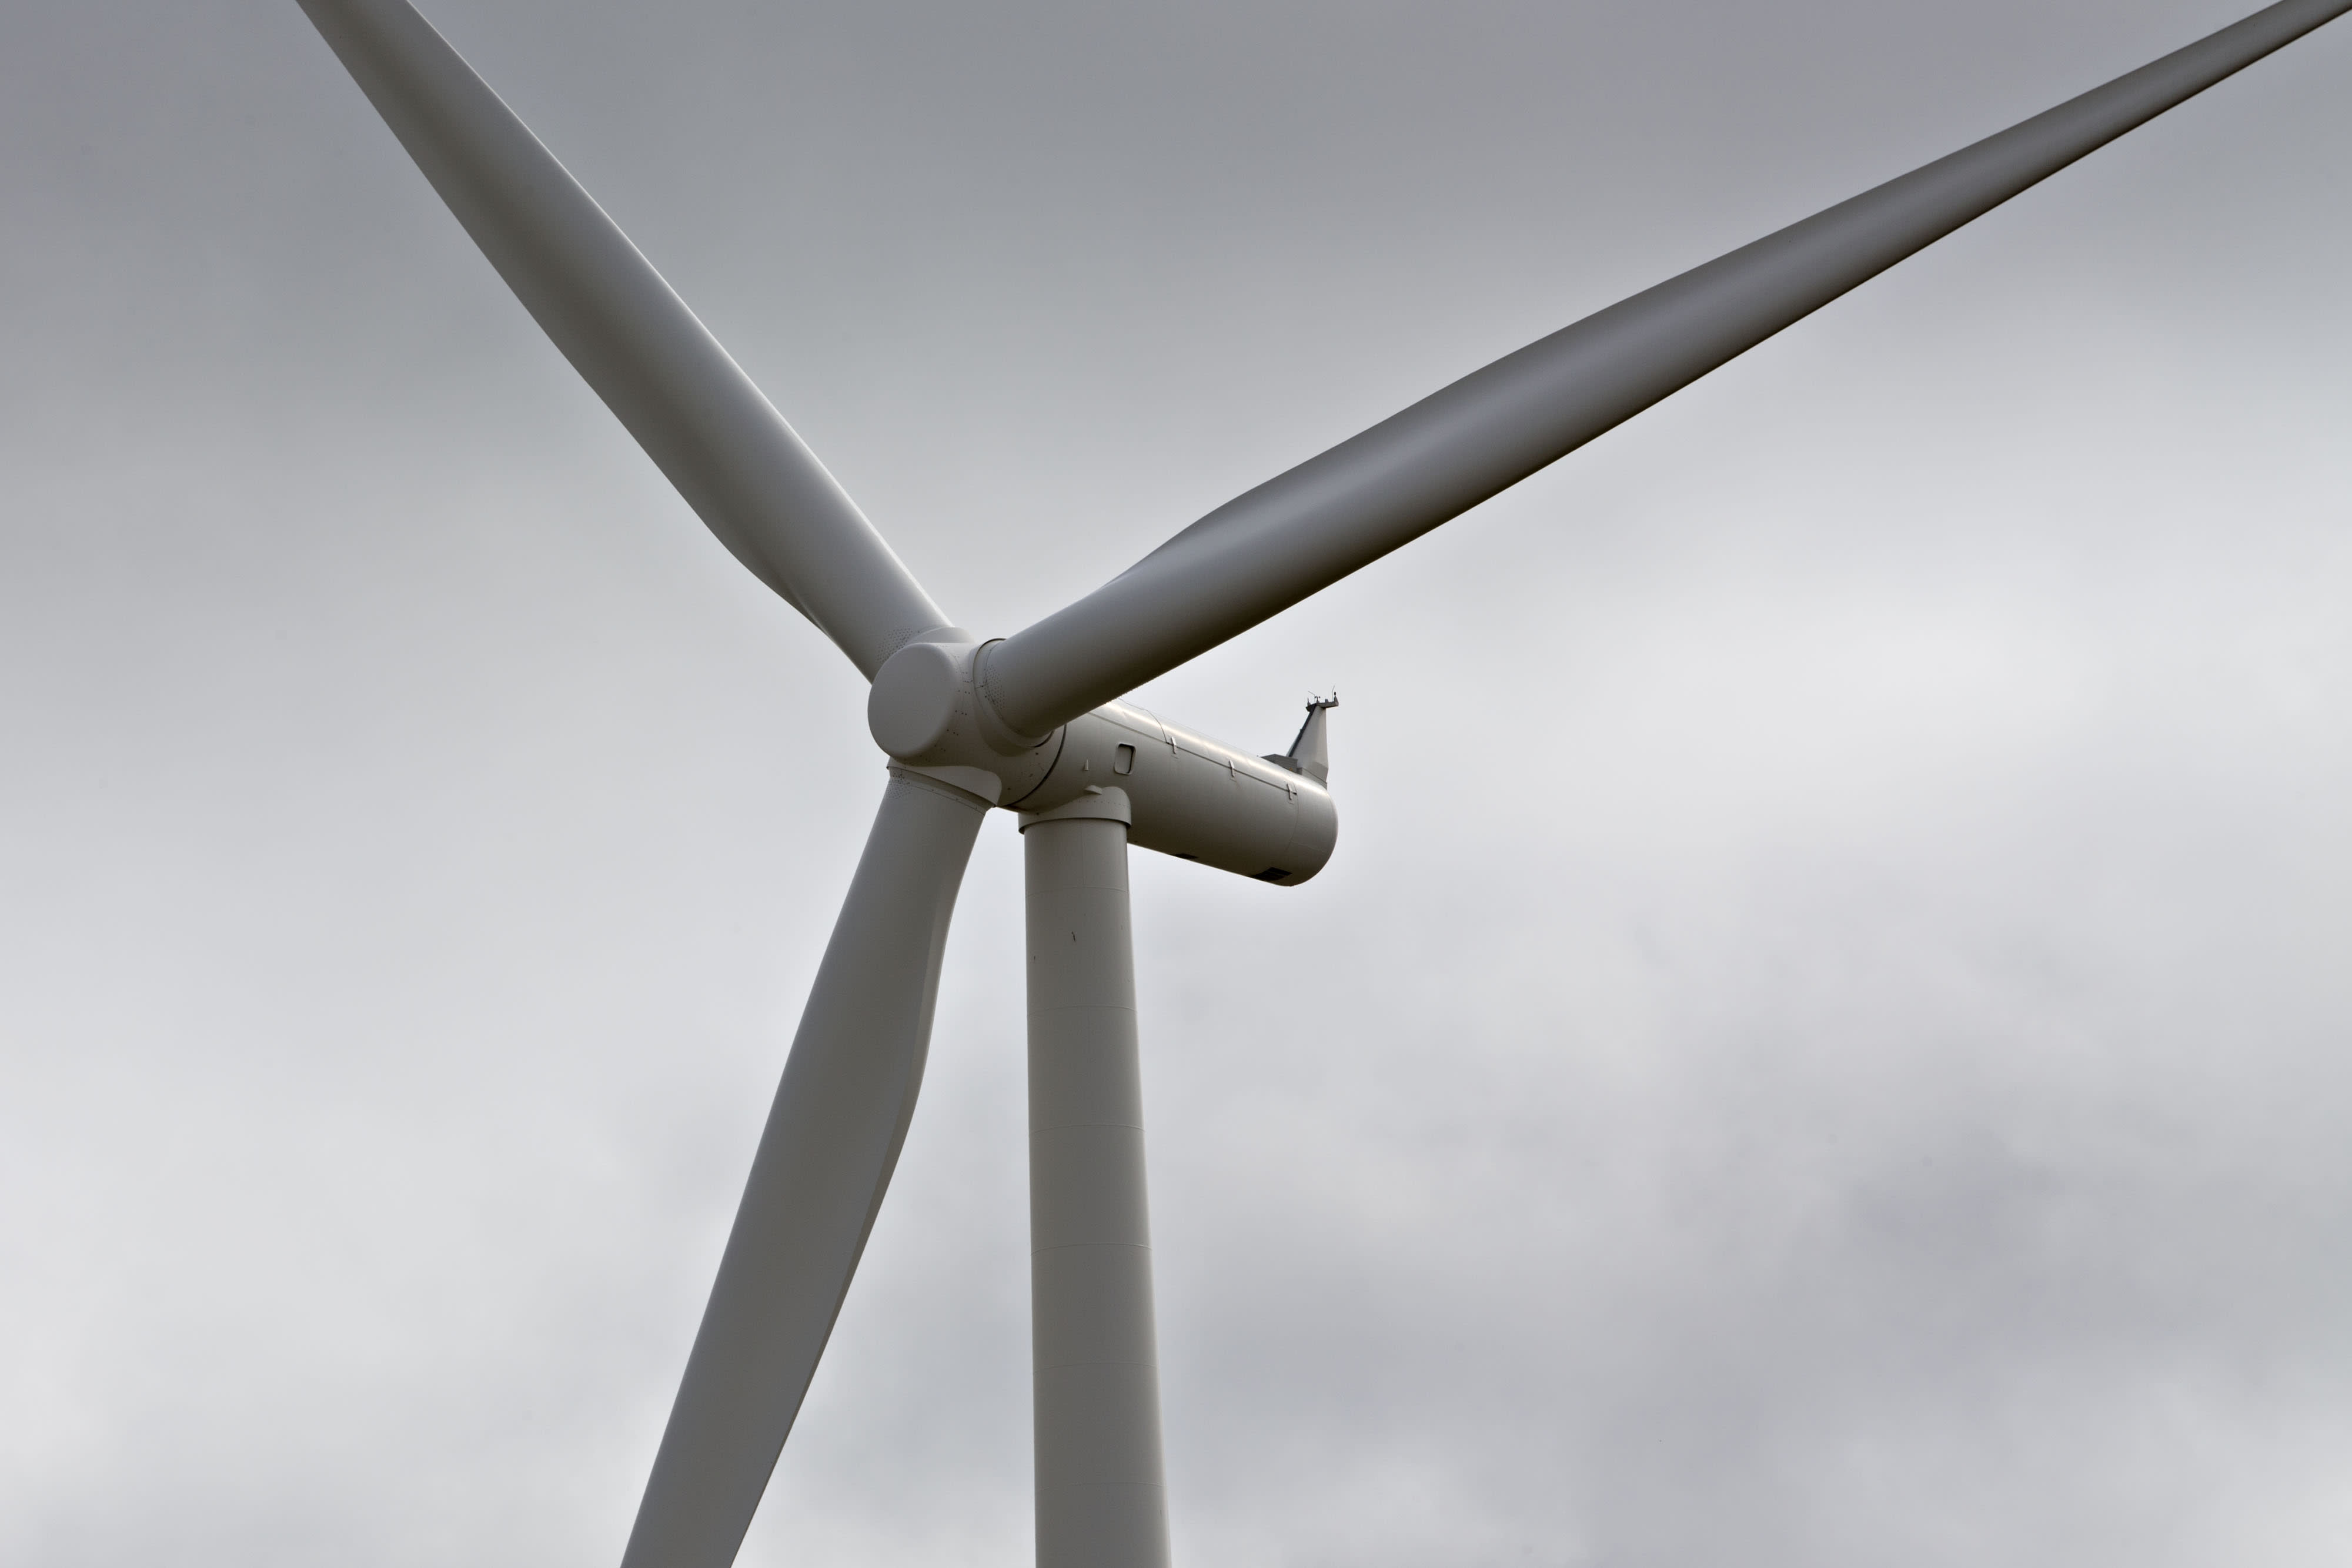 U.S. added less new wind power in 2021 than the previous year — here's why